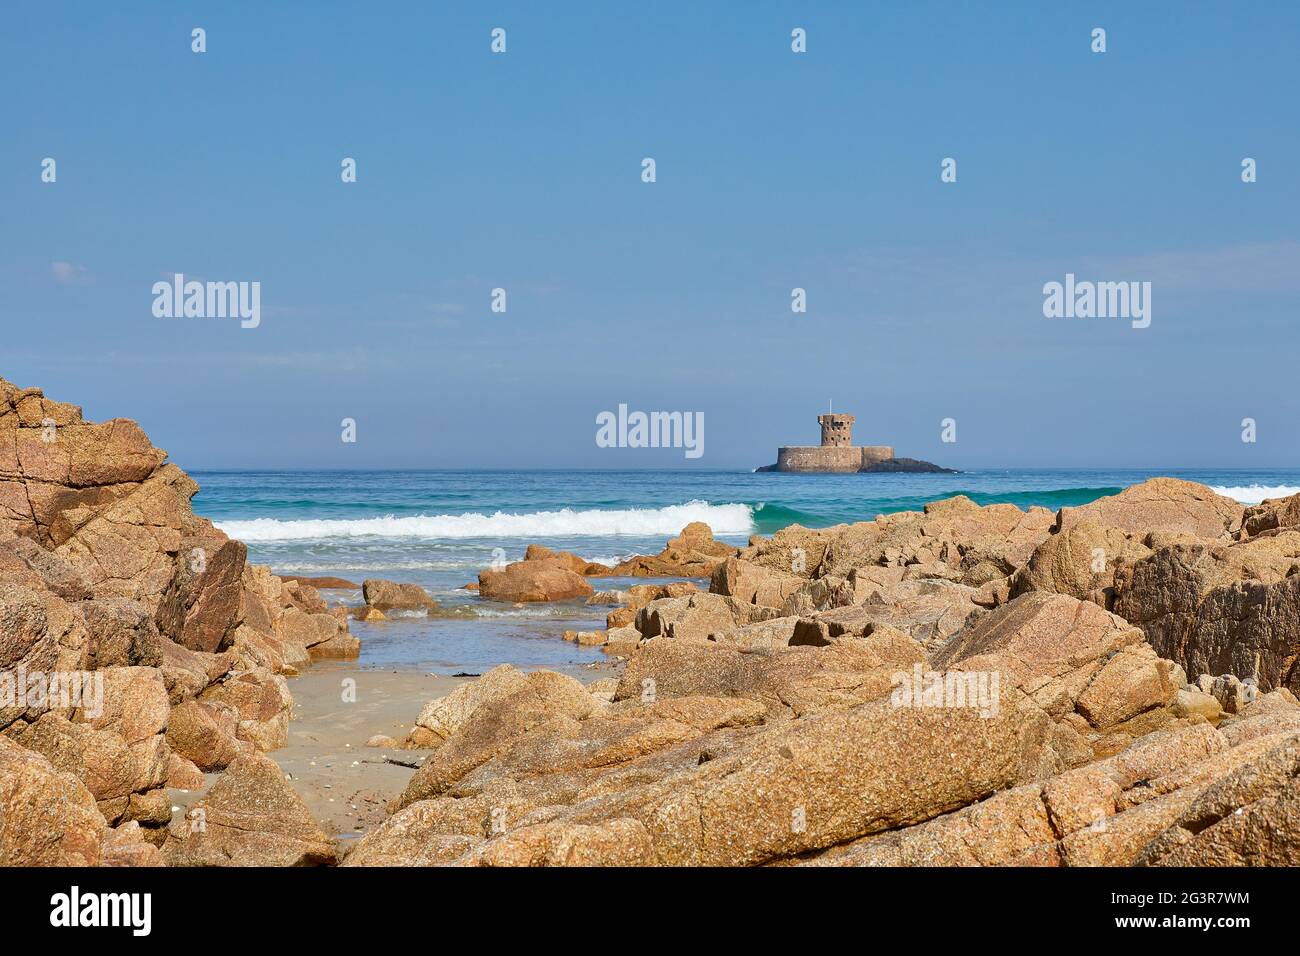 Image of Rocco Tower at St Ouens Bay, Jersey CI Stock Photo